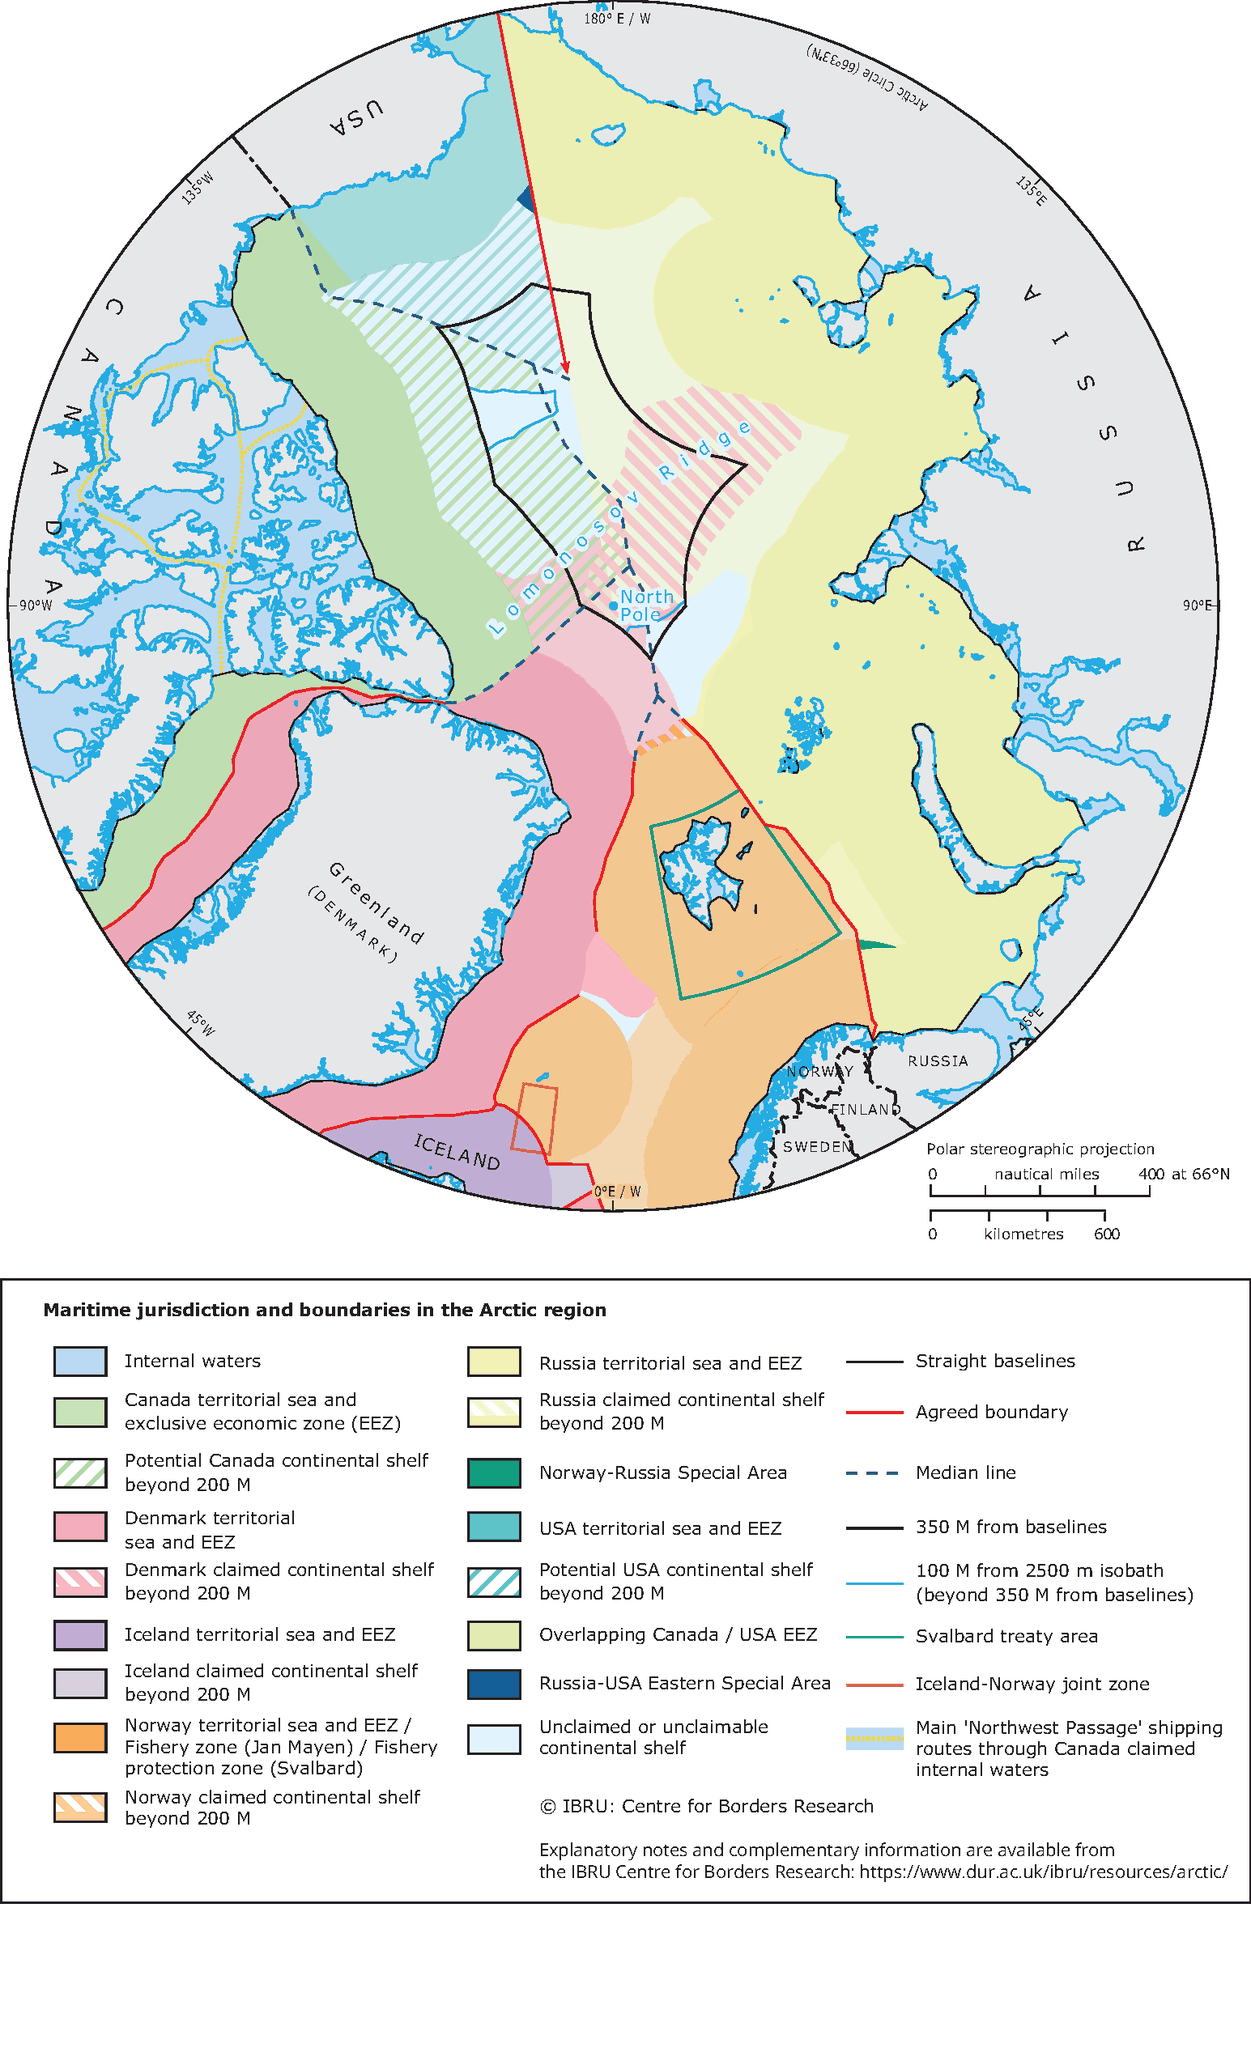 north pole map of territories